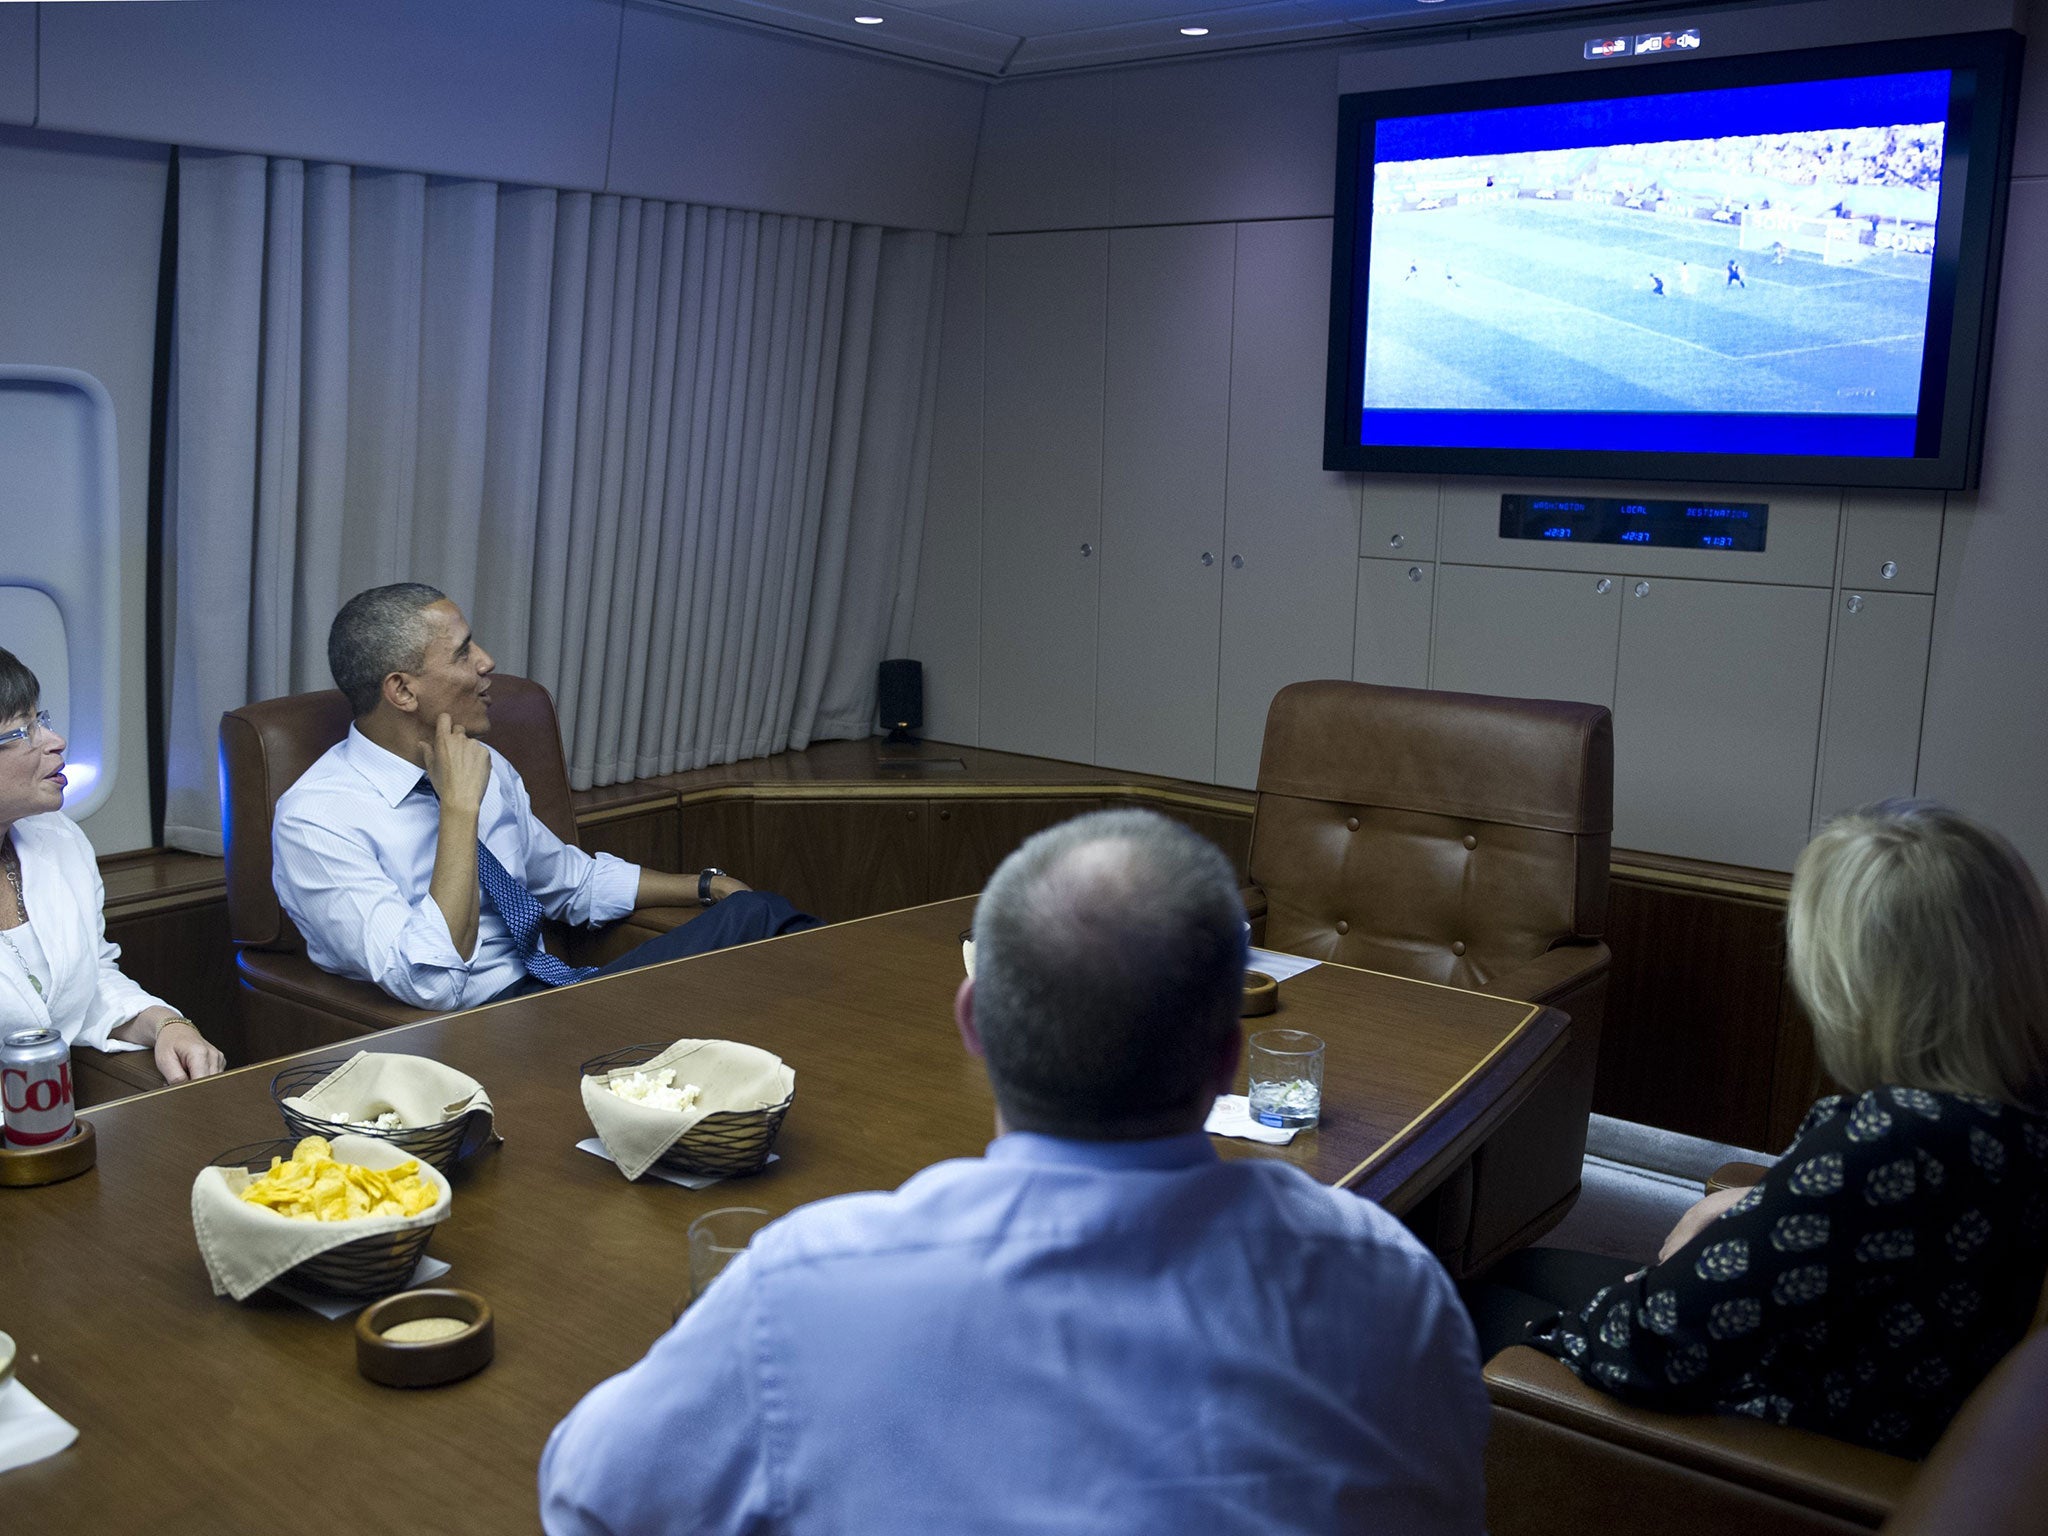 US President Barack Obama and Senior Advisor Valerie Jarrett (left) watch the 2014 World Cup match between the US and Germany while en route to Minnepolis